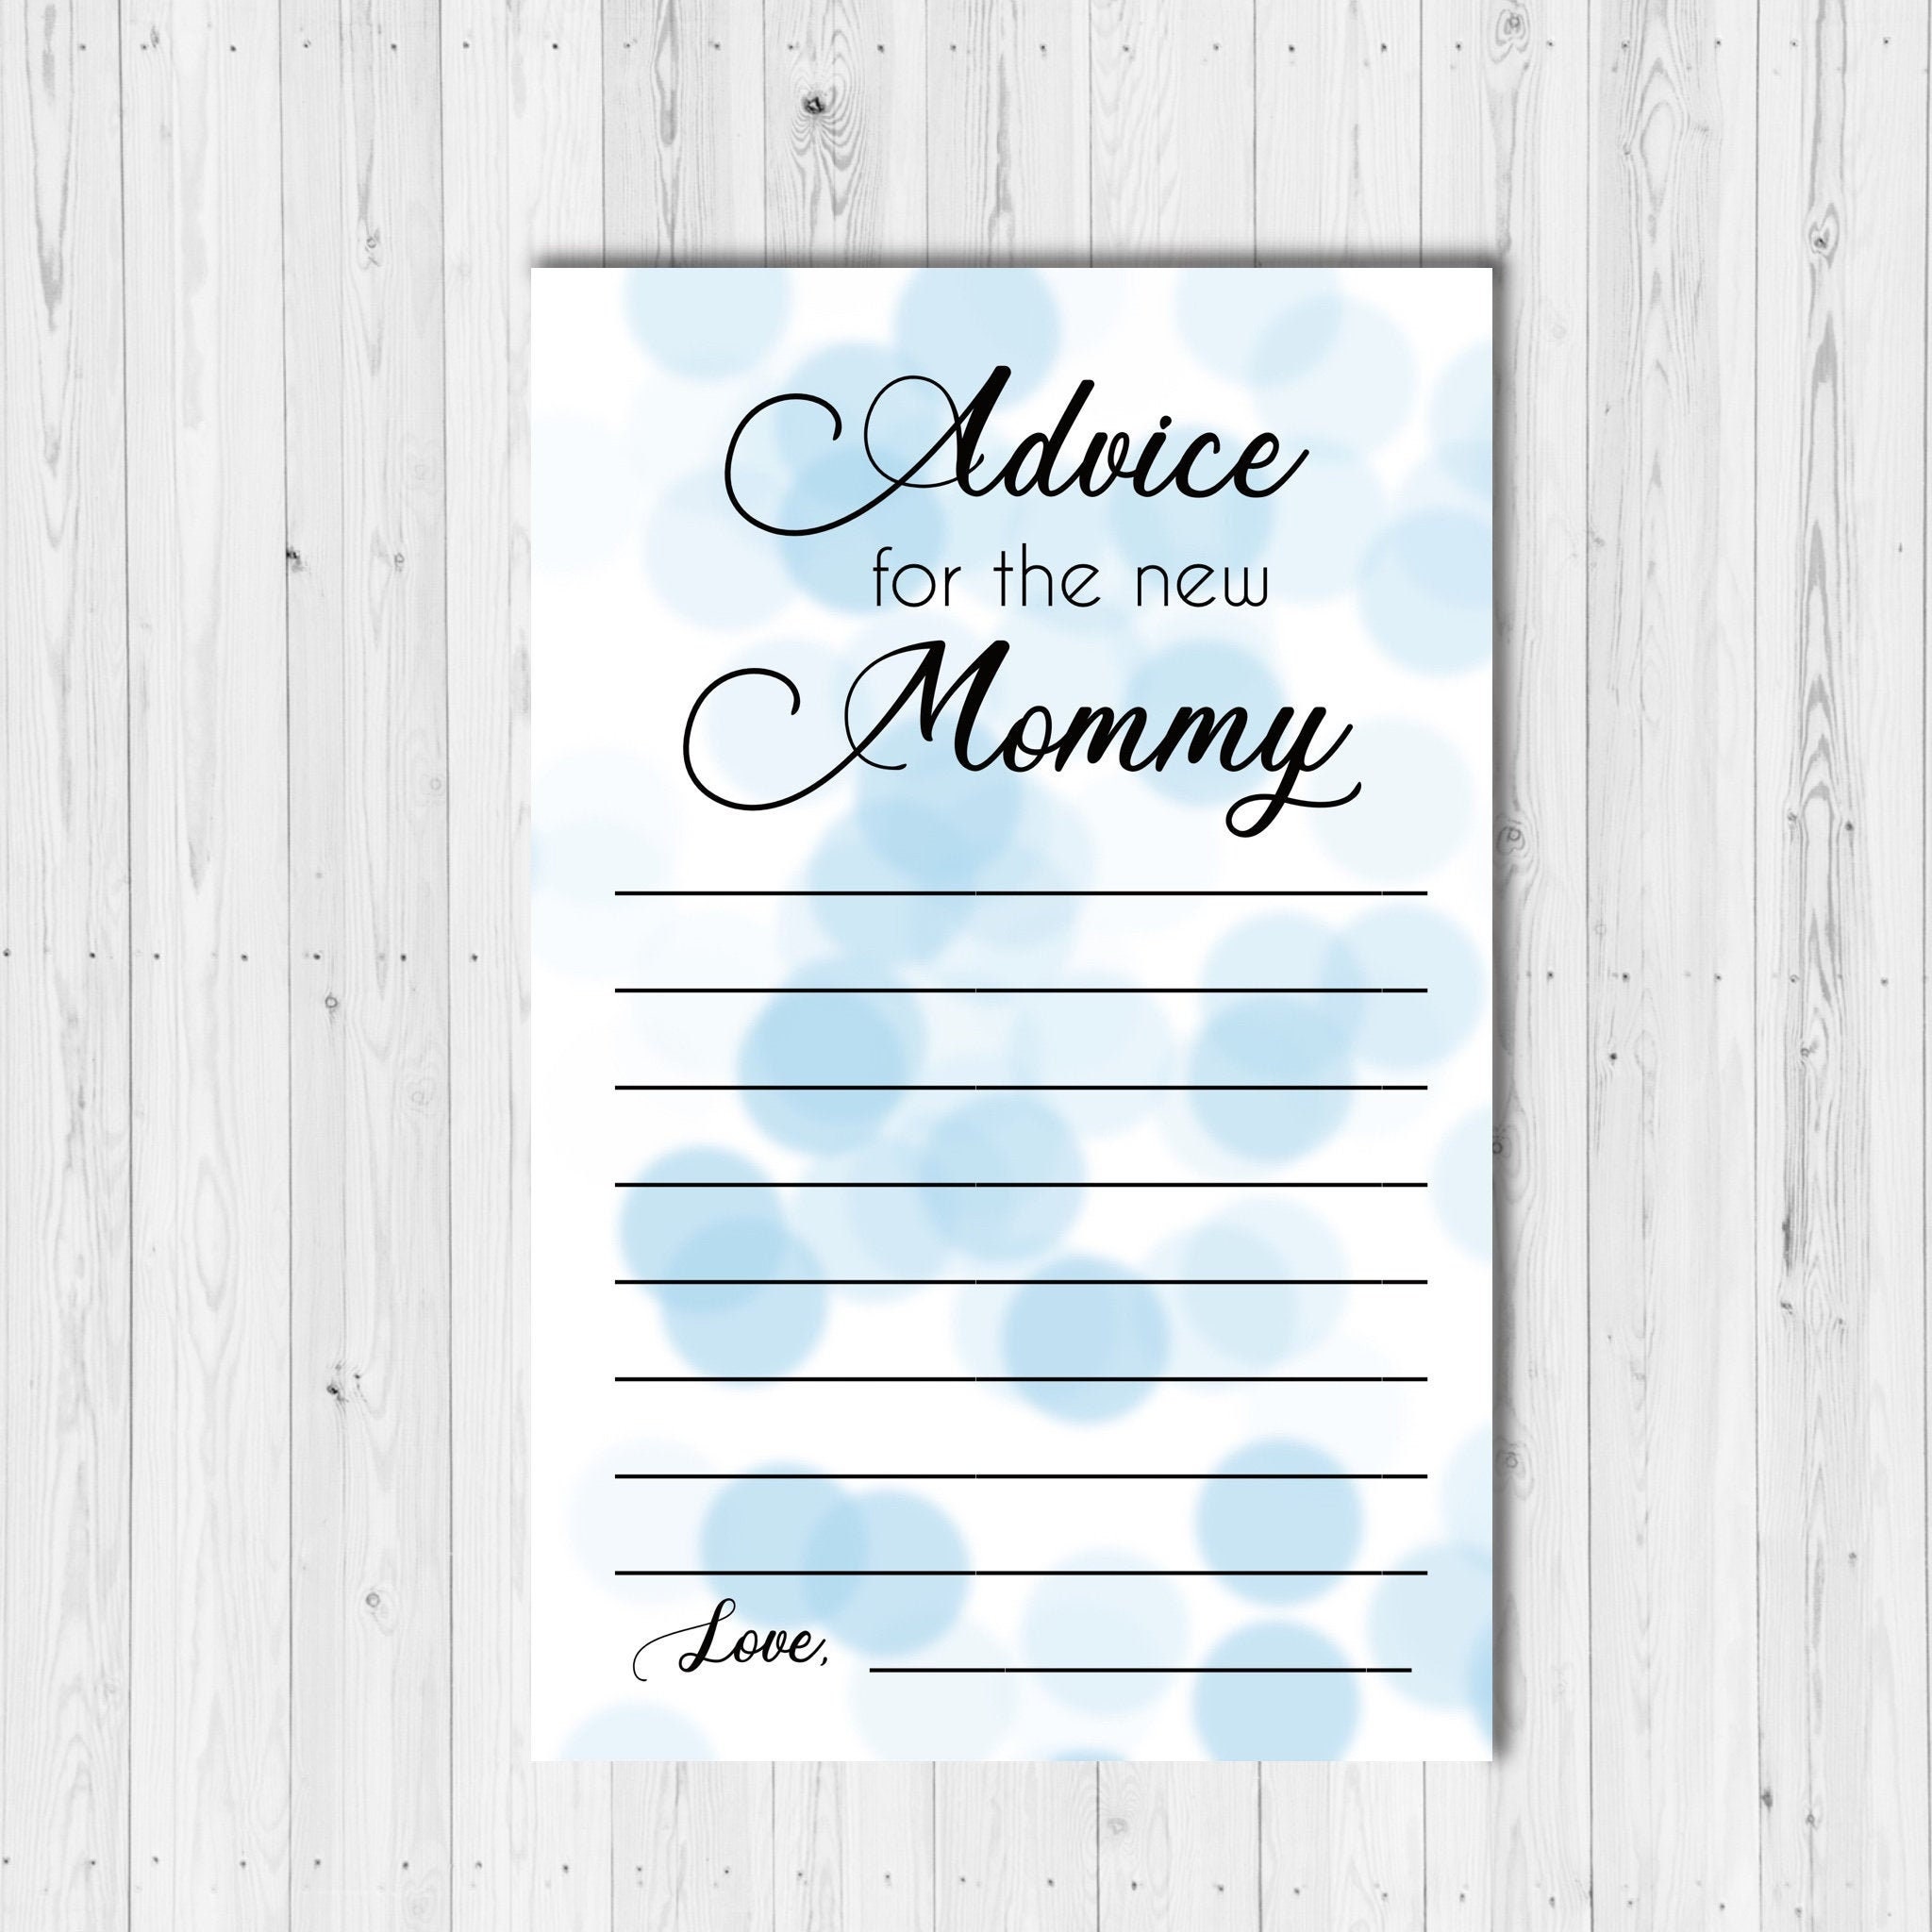 advice-for-the-new-mommy-baby-shower-game-advice-for-moms-etsy-espa-a